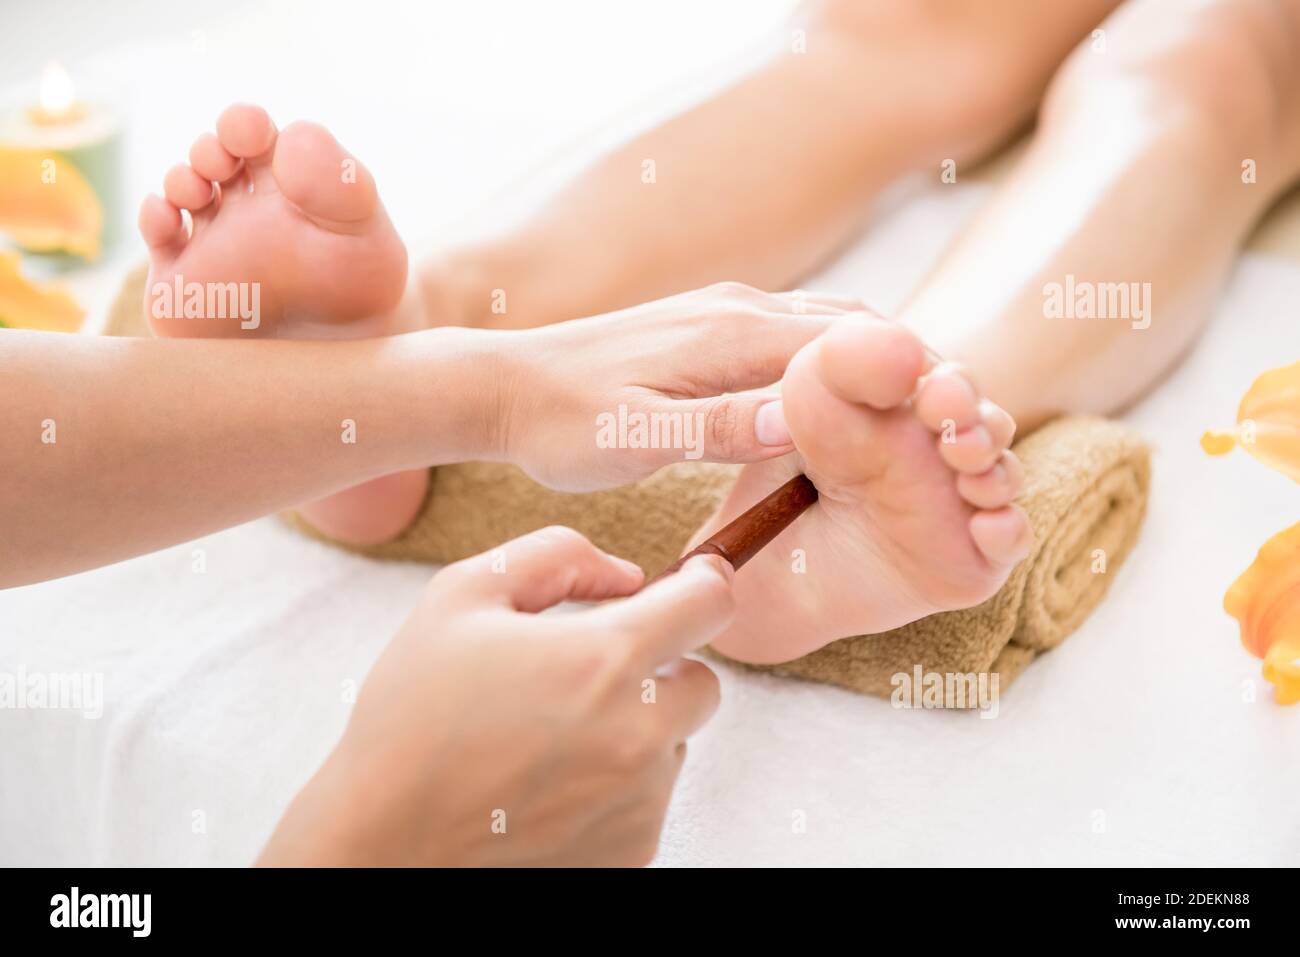 Professional therapist giving reflexology relaxing traditional Thai foot massage treatment with stick to a woman in spa Stock Photo